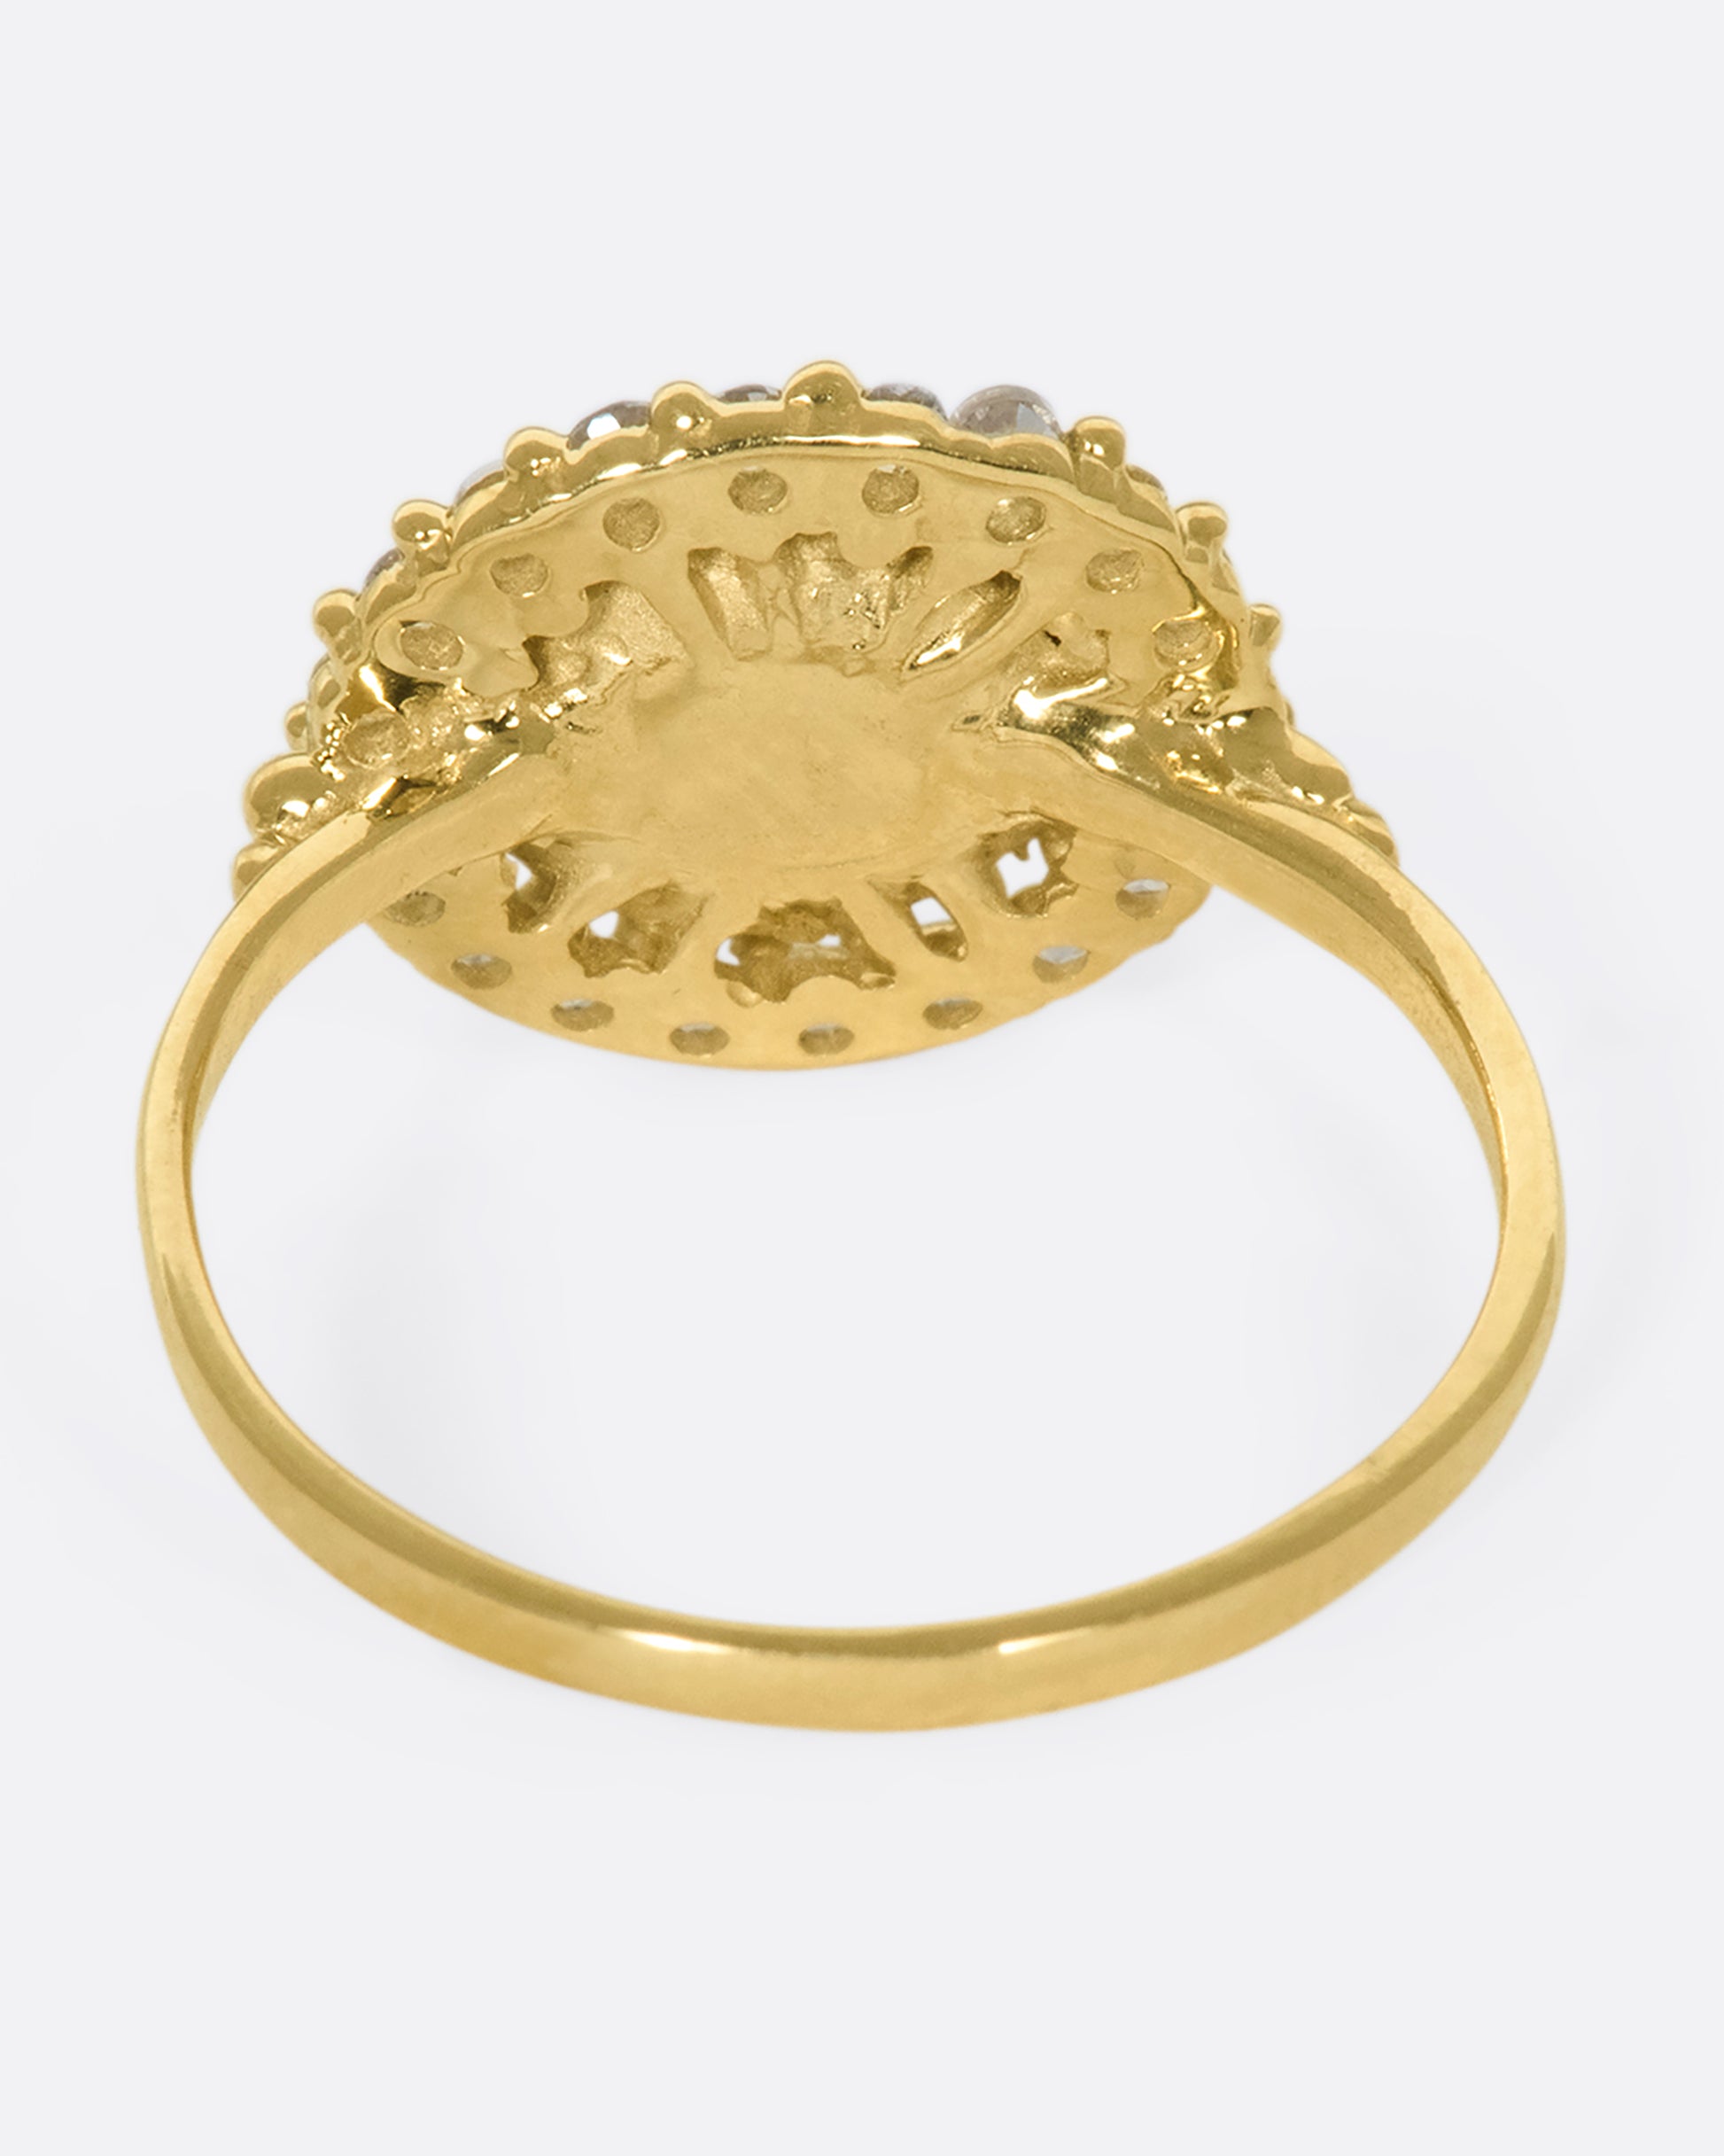 A 14k gold circle ring with a white diamond halo